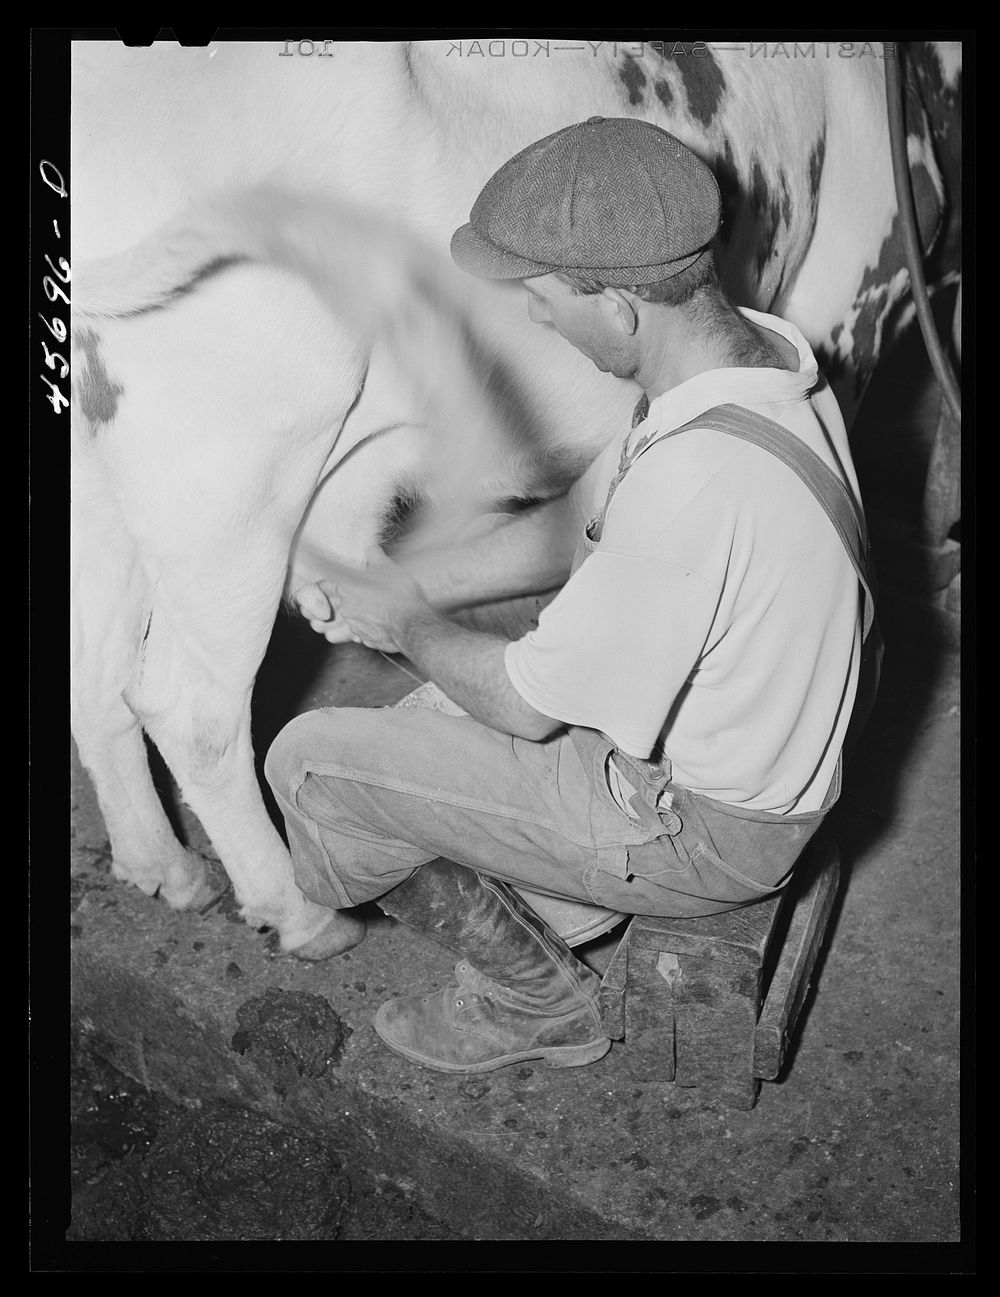 [Untitled photo, possibly related to: William Gaynor milking one of his cows on his farm near Fairfield, Vermont]. Sourced…